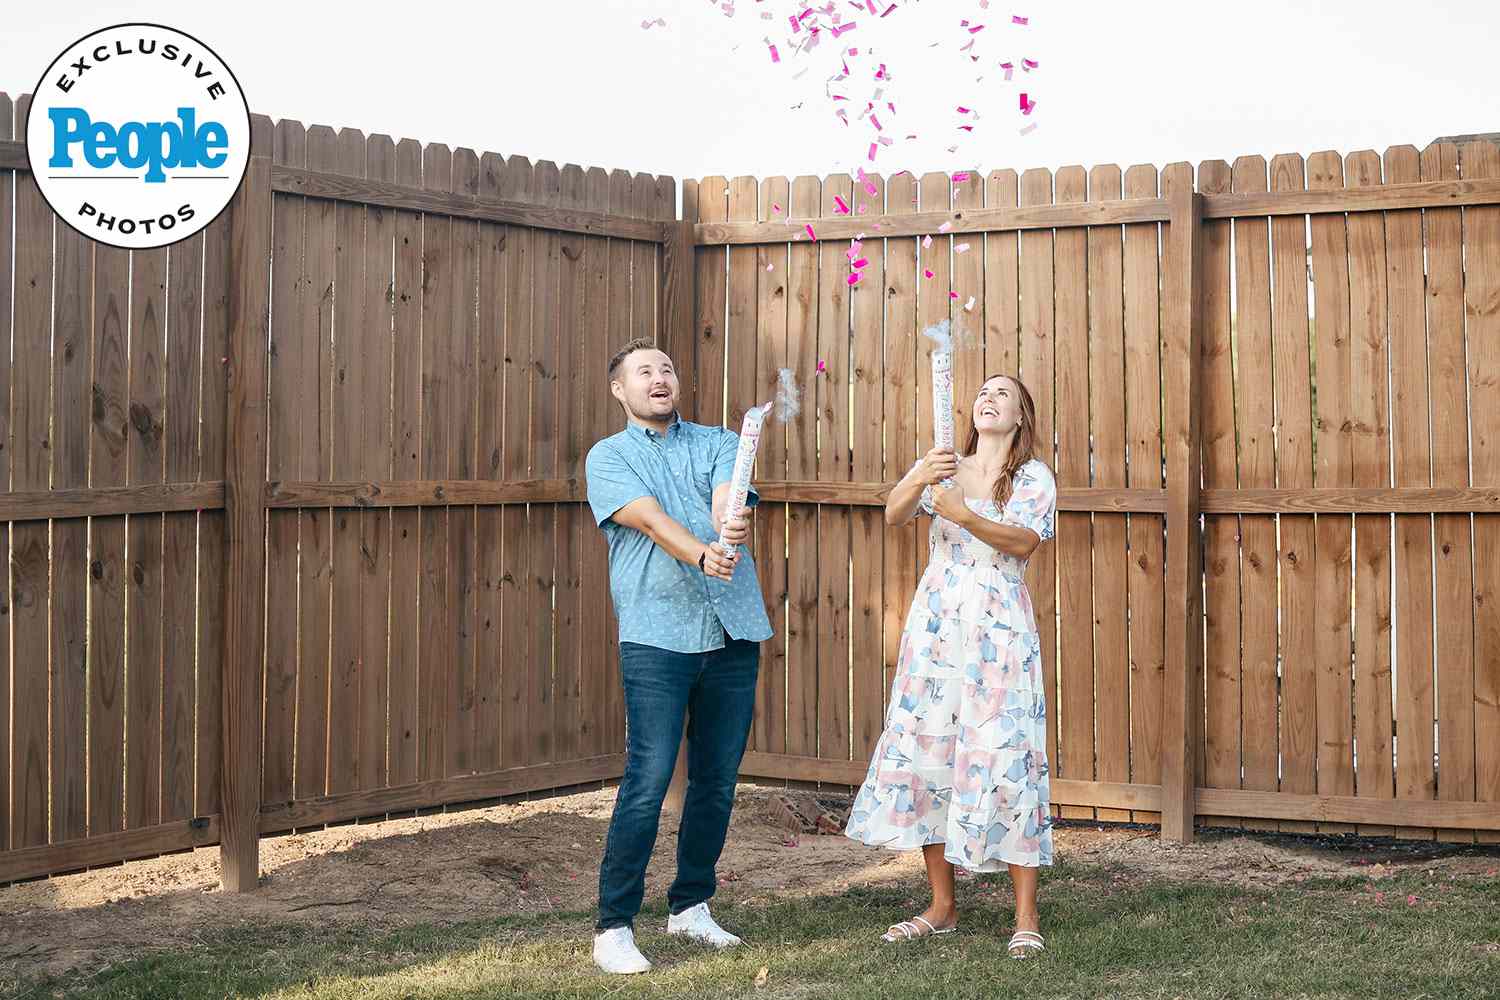 Jedidiah Duggar's Wife Katey Duggar Is Pregnant, Expecting Twins: 'We Are Overjoyed' (Exclusive)